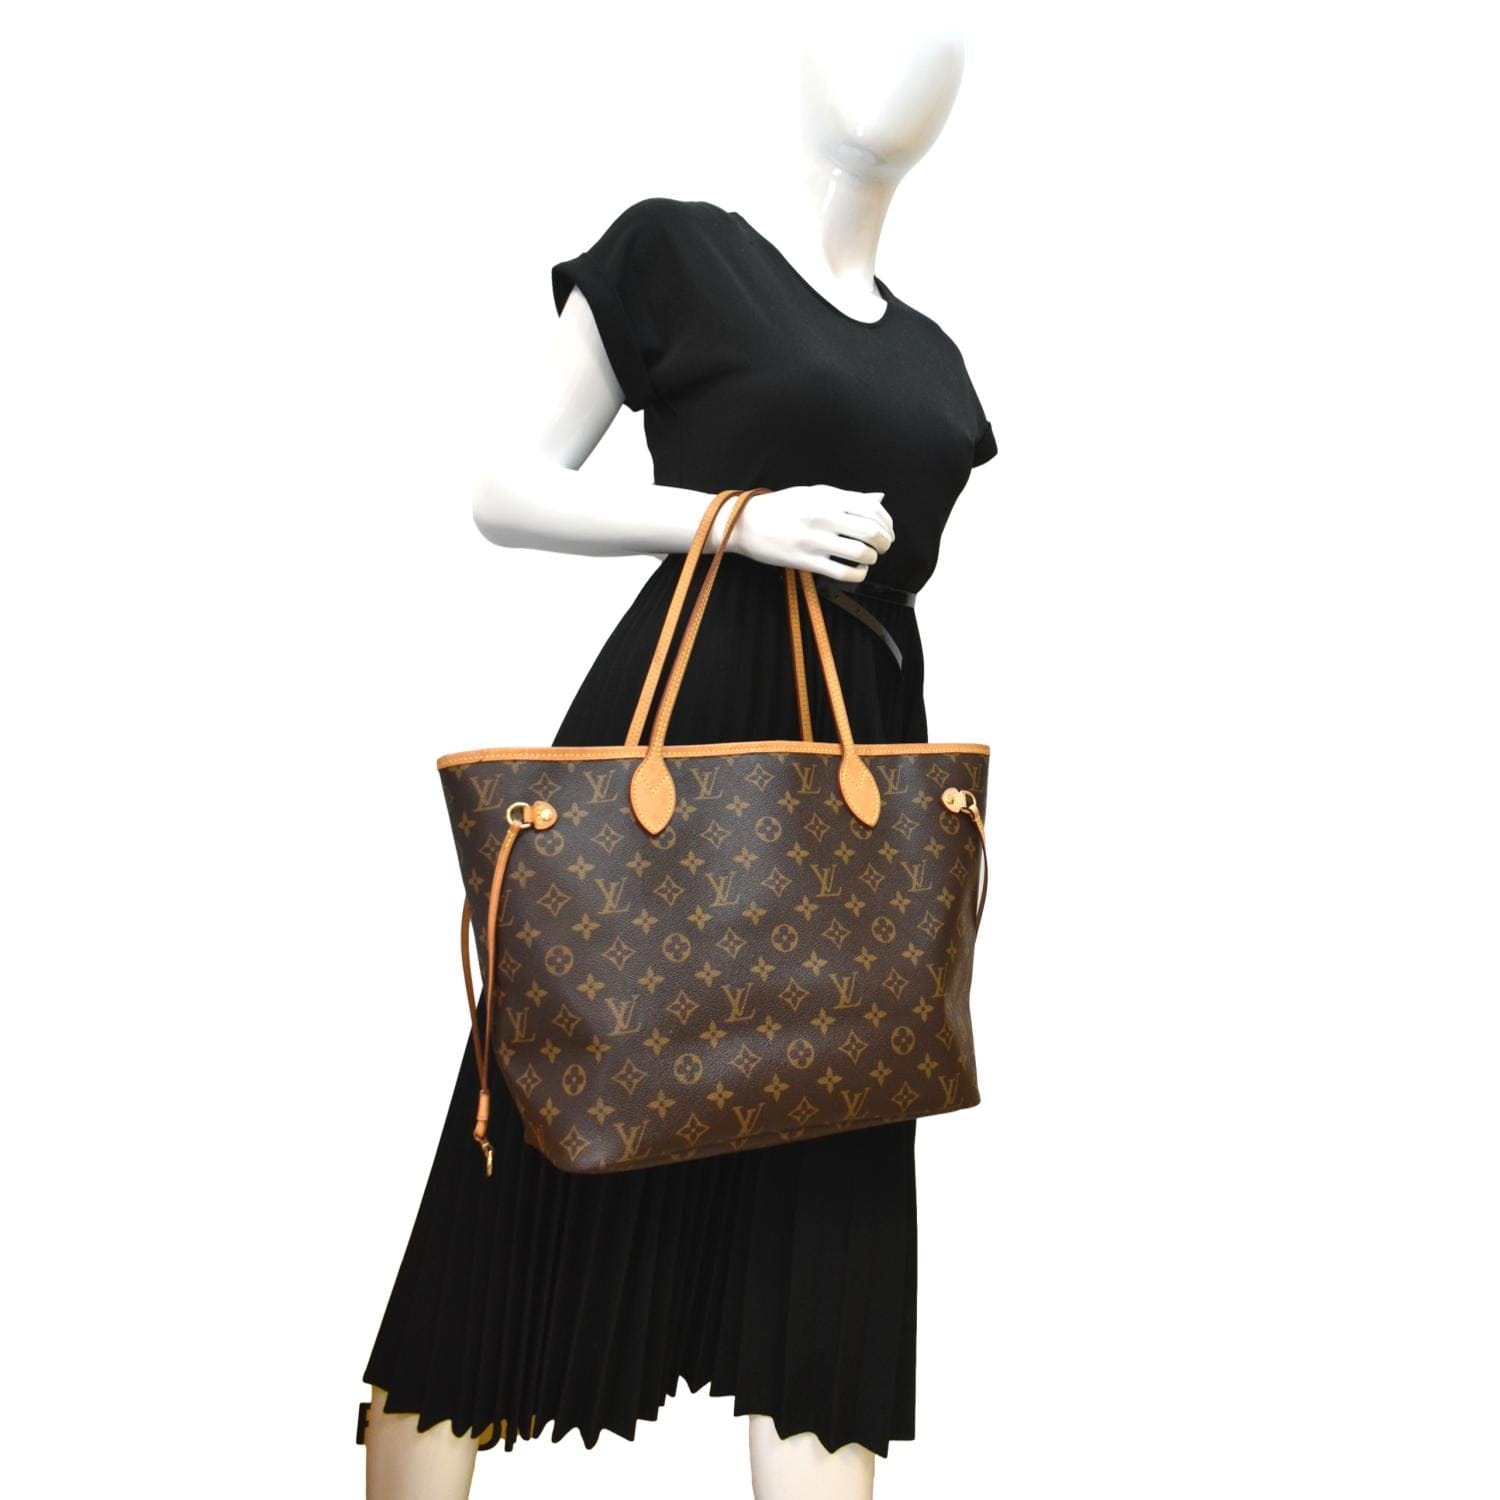 Louis Vuitton lv neverfull MM woman shopping bag monogram with